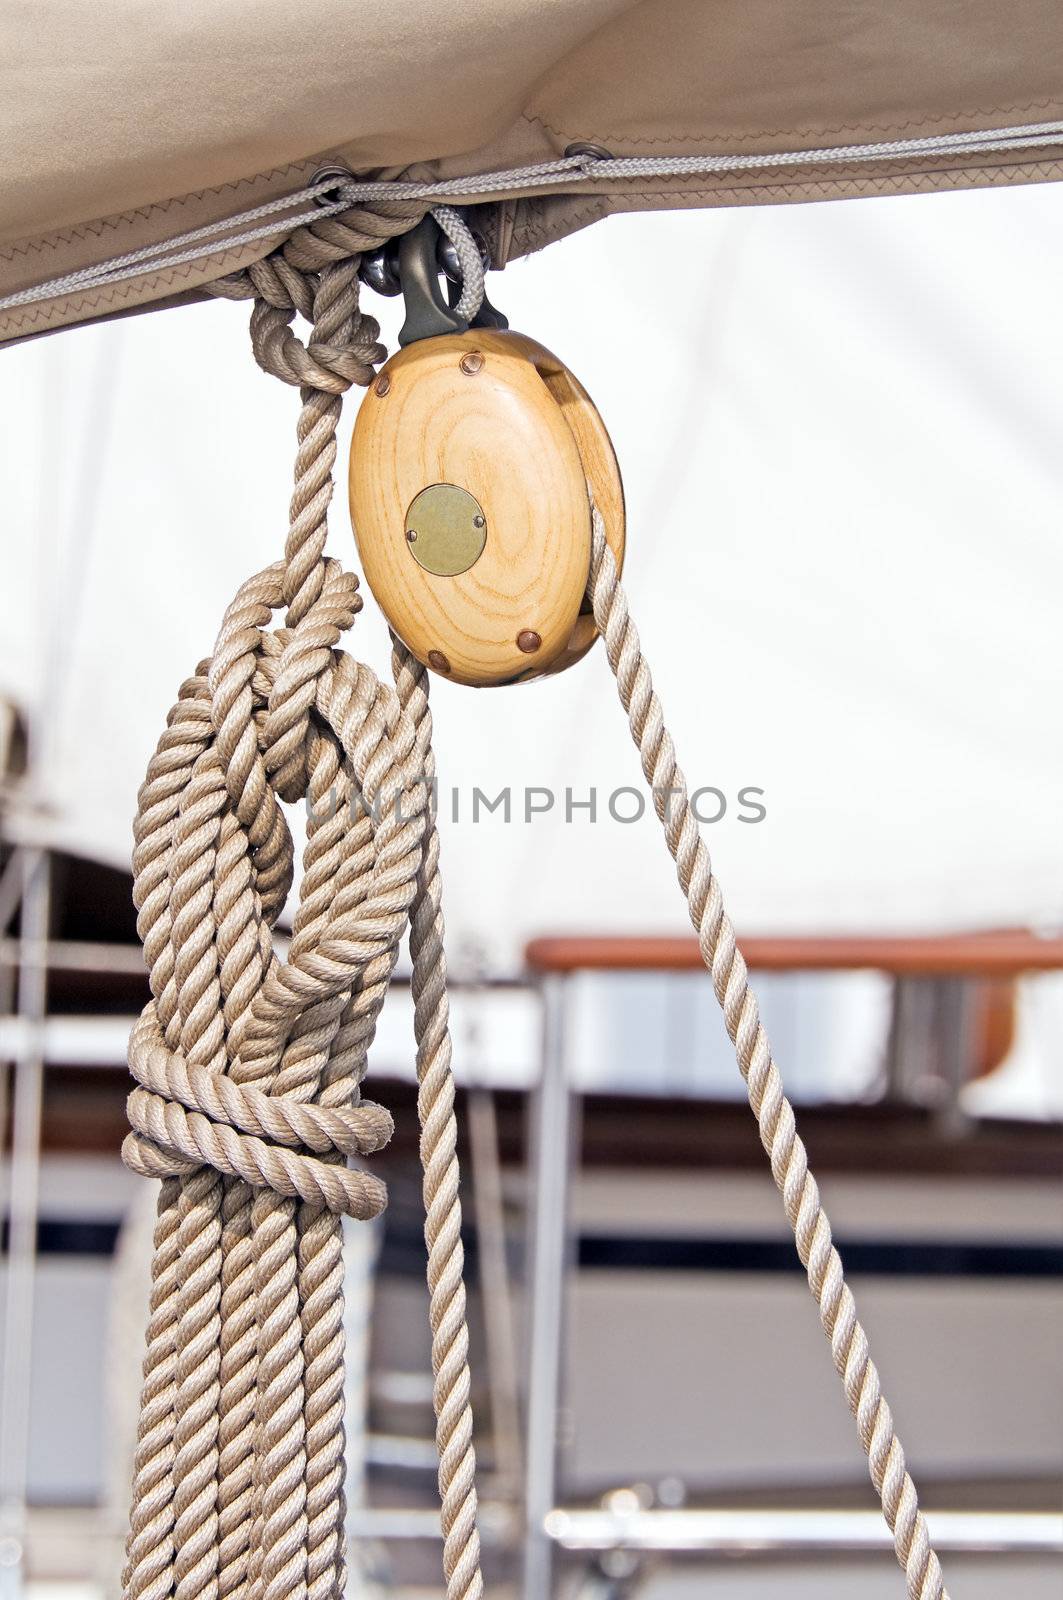 Wooden pulley with rope on a sailboat boom